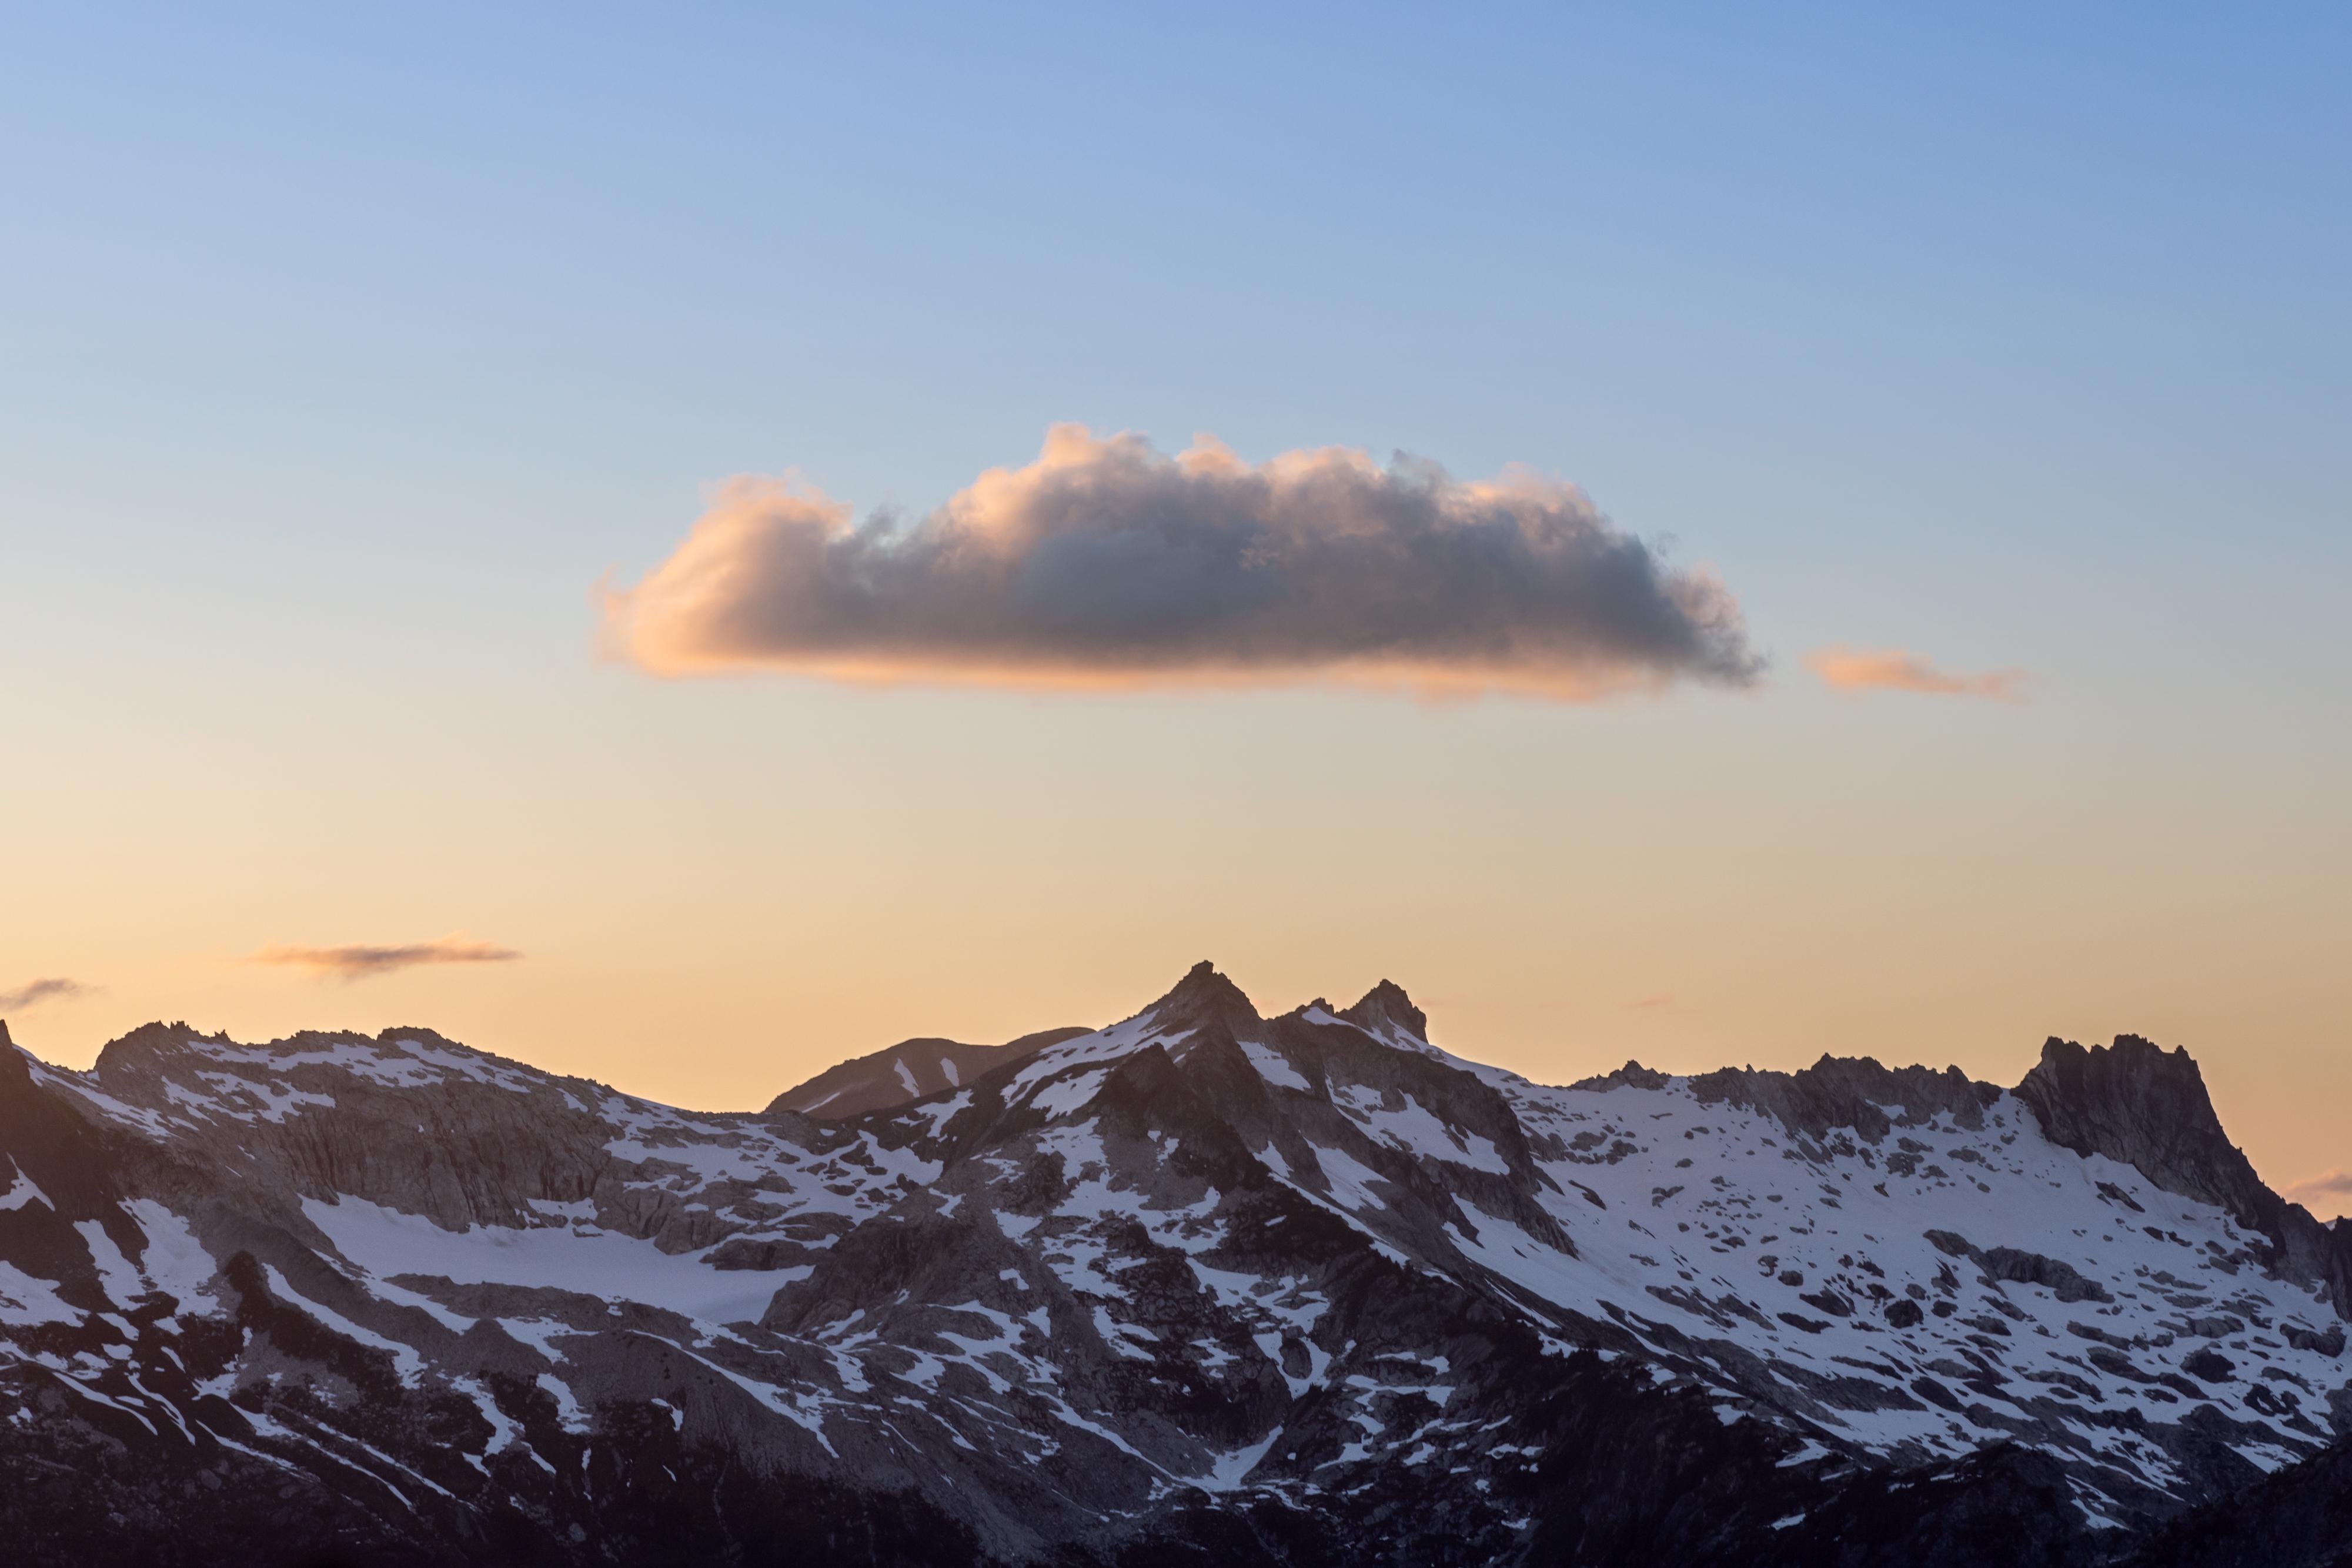 General 4000x2667 clouds nature landscape mountain chain North Cascades National Park USA mountains sunset